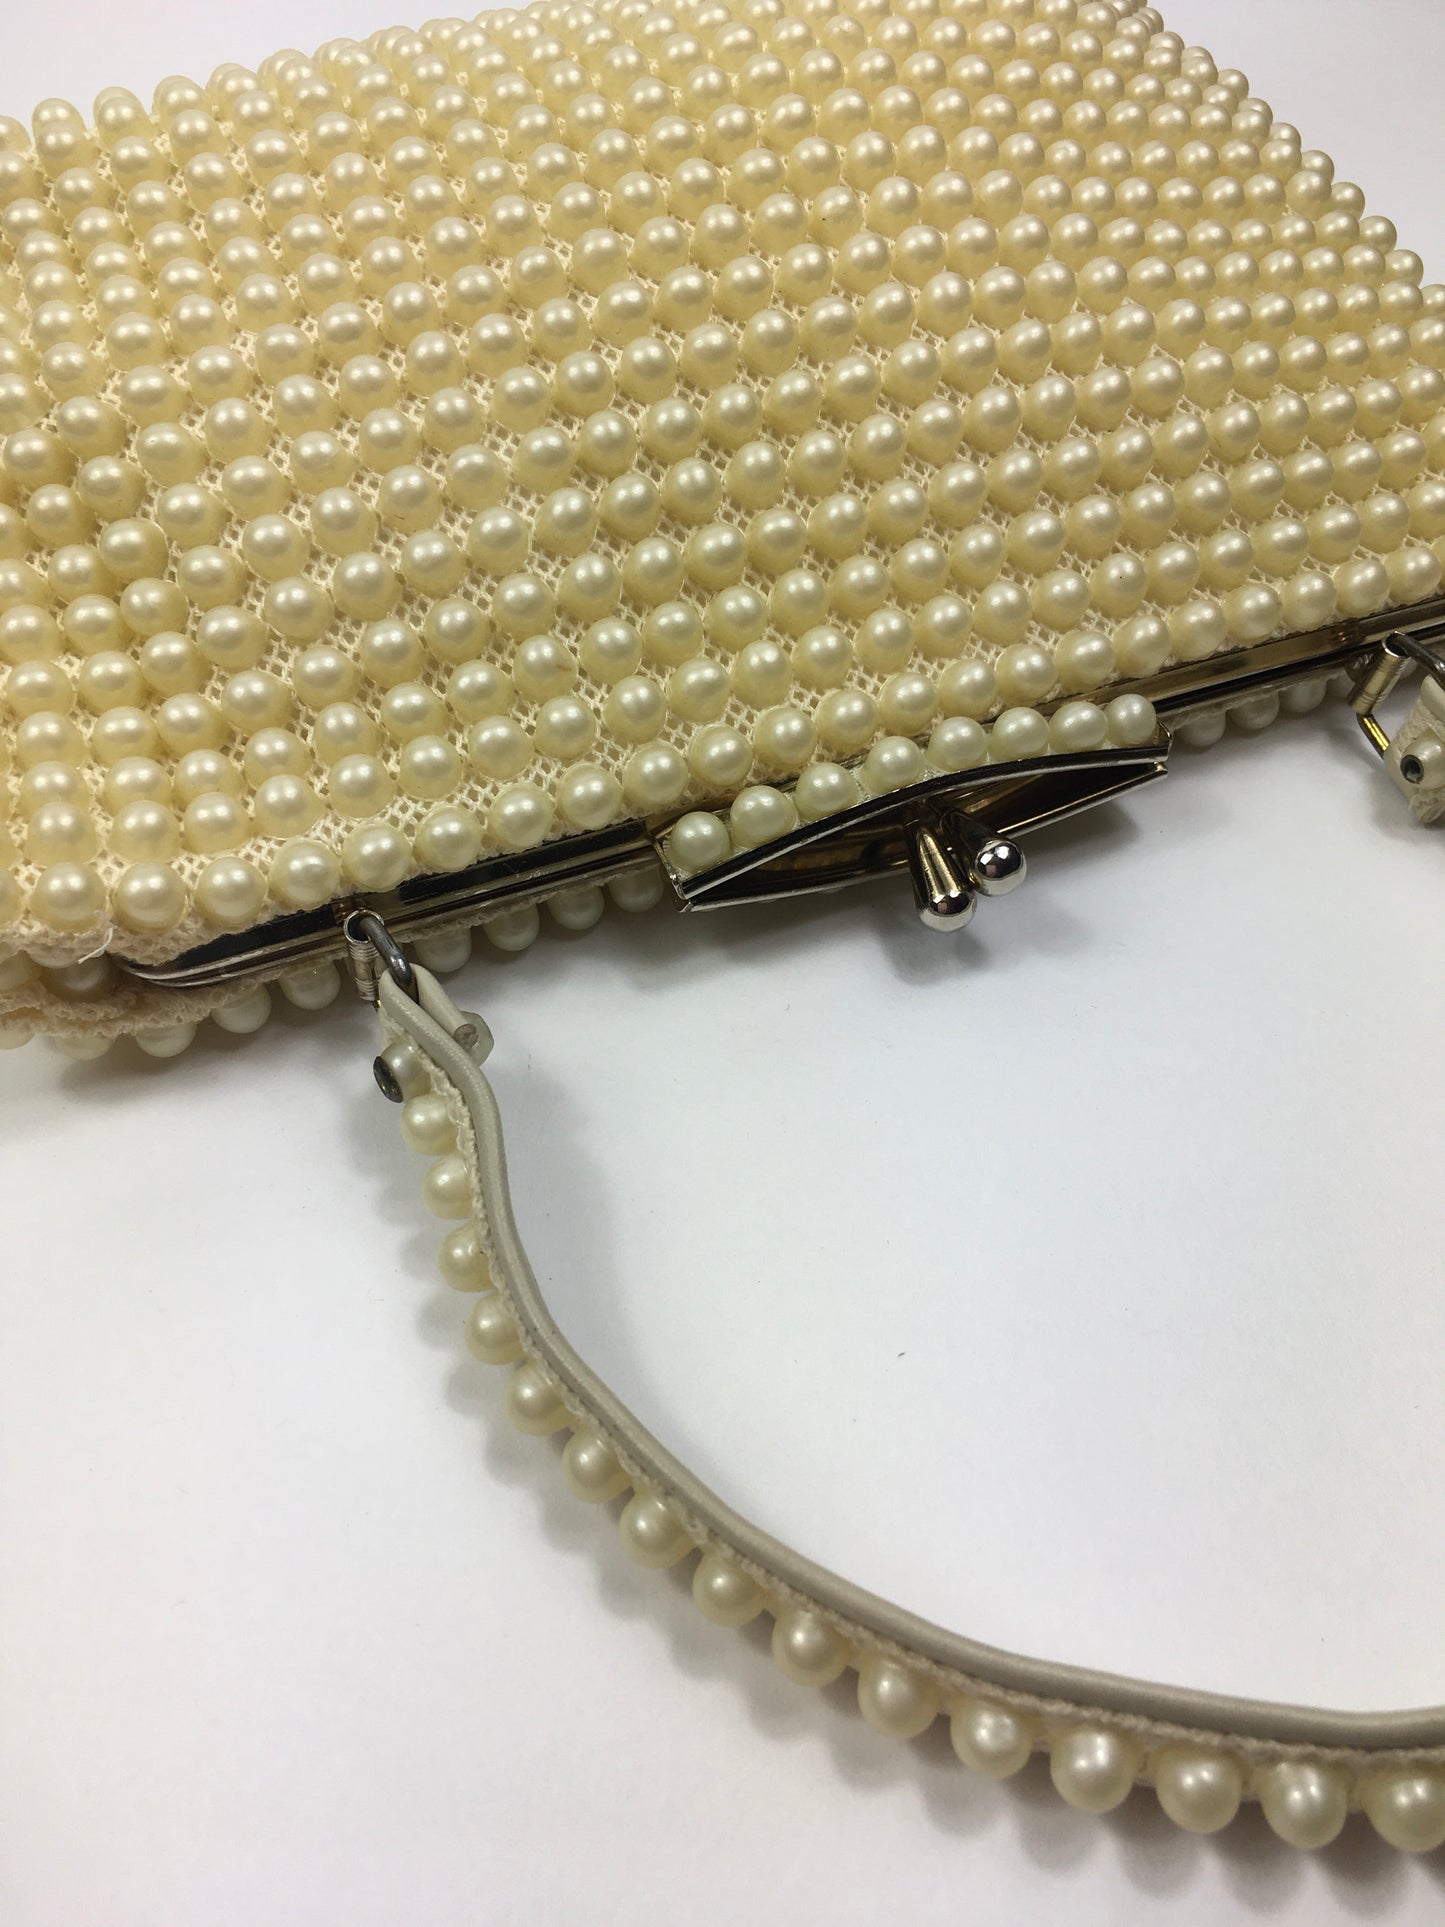 Original 1950’s Fabulous Pearly Handbag - In A Lovely Warm Cream With Internal Pocket Mirror